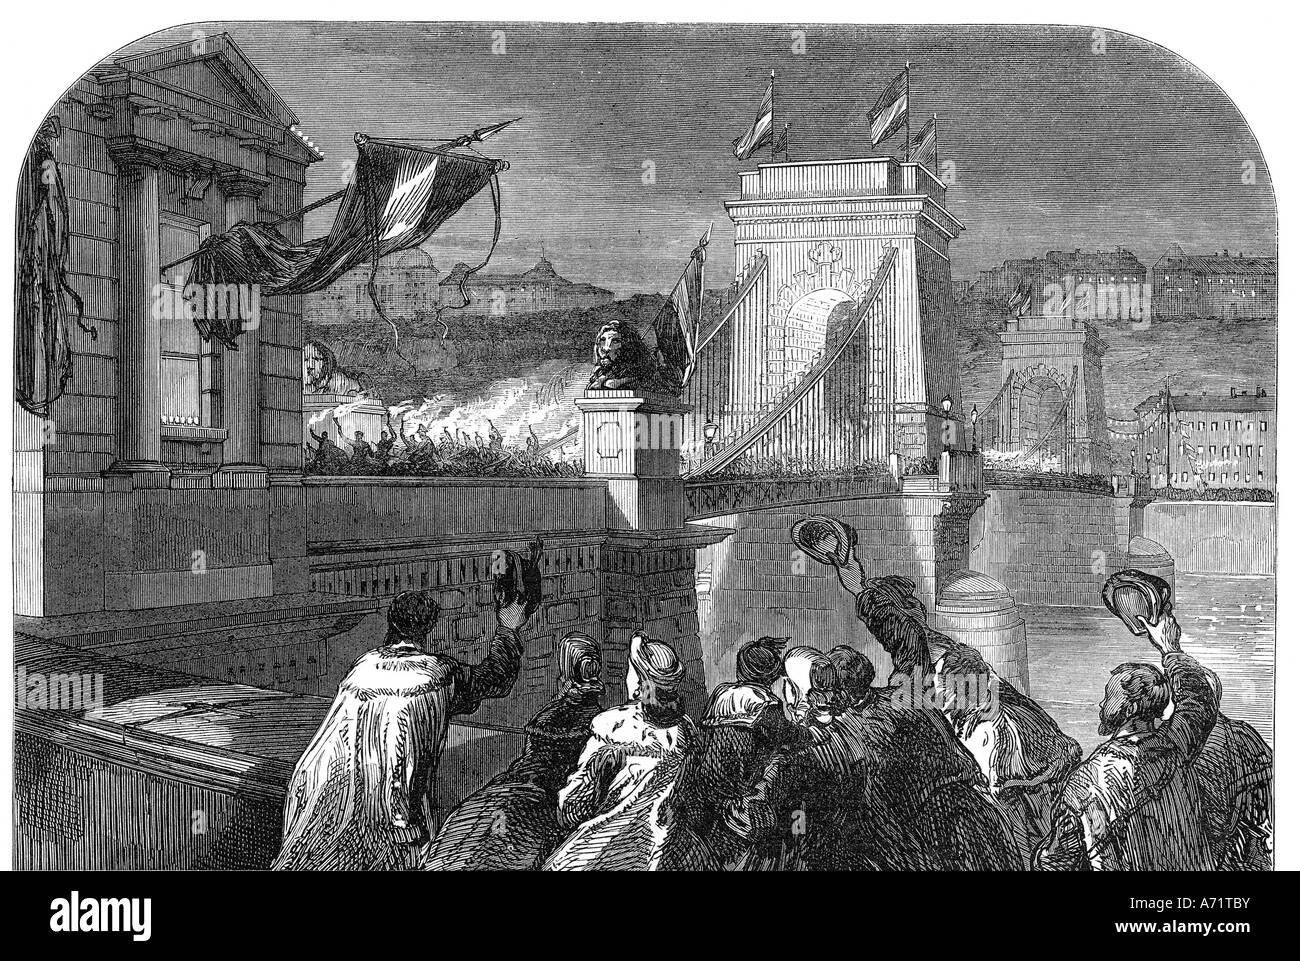 geography / travel, Hungary, Budapest, bridges, Emperor Franz Joseph visiting chain bridge, engraving, illustrated by London News, 13.1.1866, historic, historical, 19th century, Europe, architecture, suspension bridge, built by William Thierney Clark 1840 - 1849, river, Danube, Dual Monarchy, Austro-Hungarian Empire, Austria-Hungary, King of Hungary, Habsburg, flags, festive, jubilation, crowd, people, enthusiasm, hat, waving with hats, Stock Photo